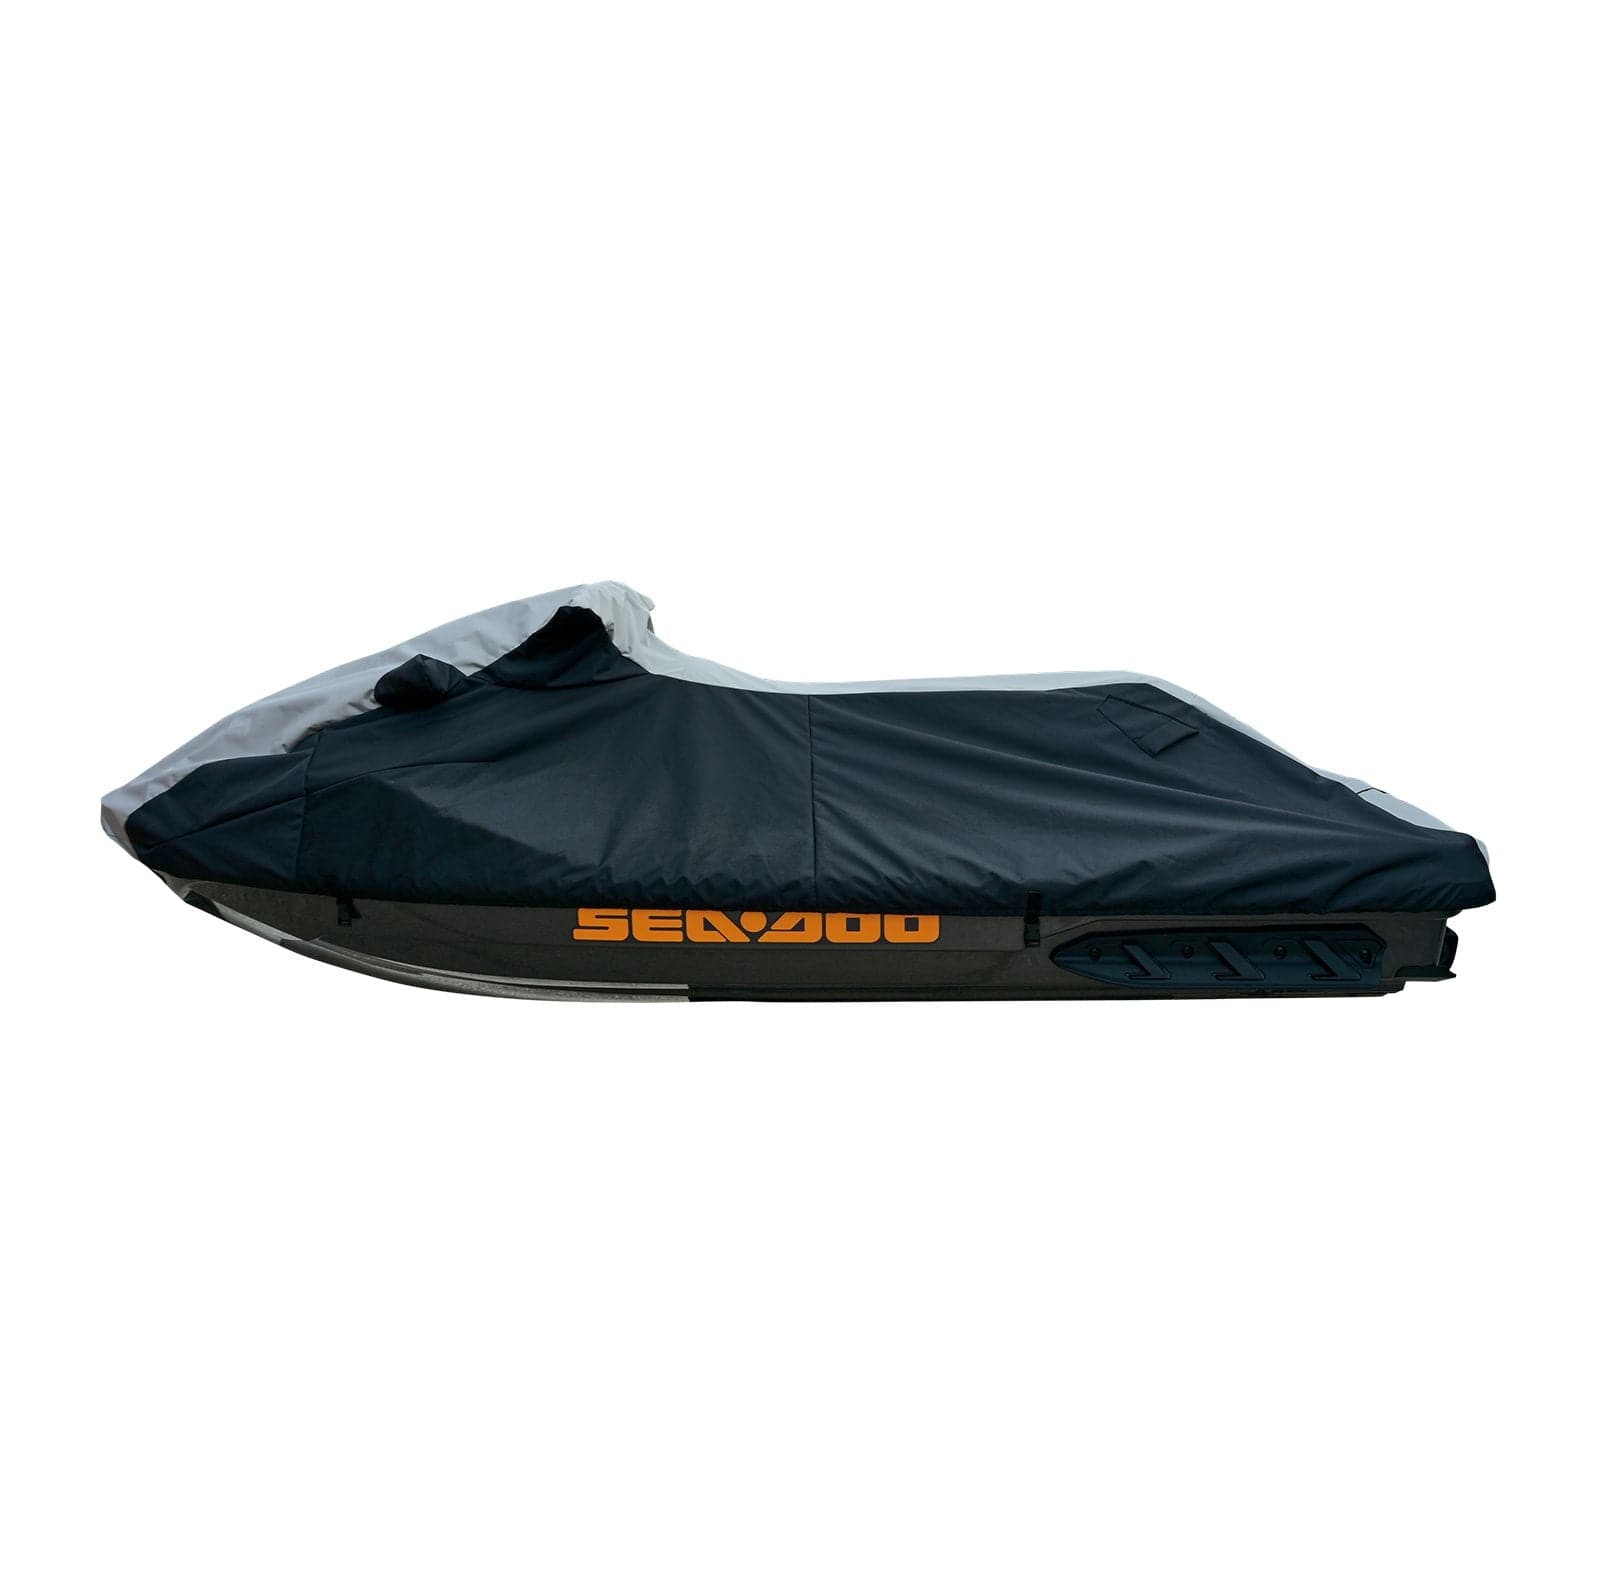 Trailerable Storage cover with vents for Sea-Doo 2010-2013 GTX 215, RXT, RXT-X